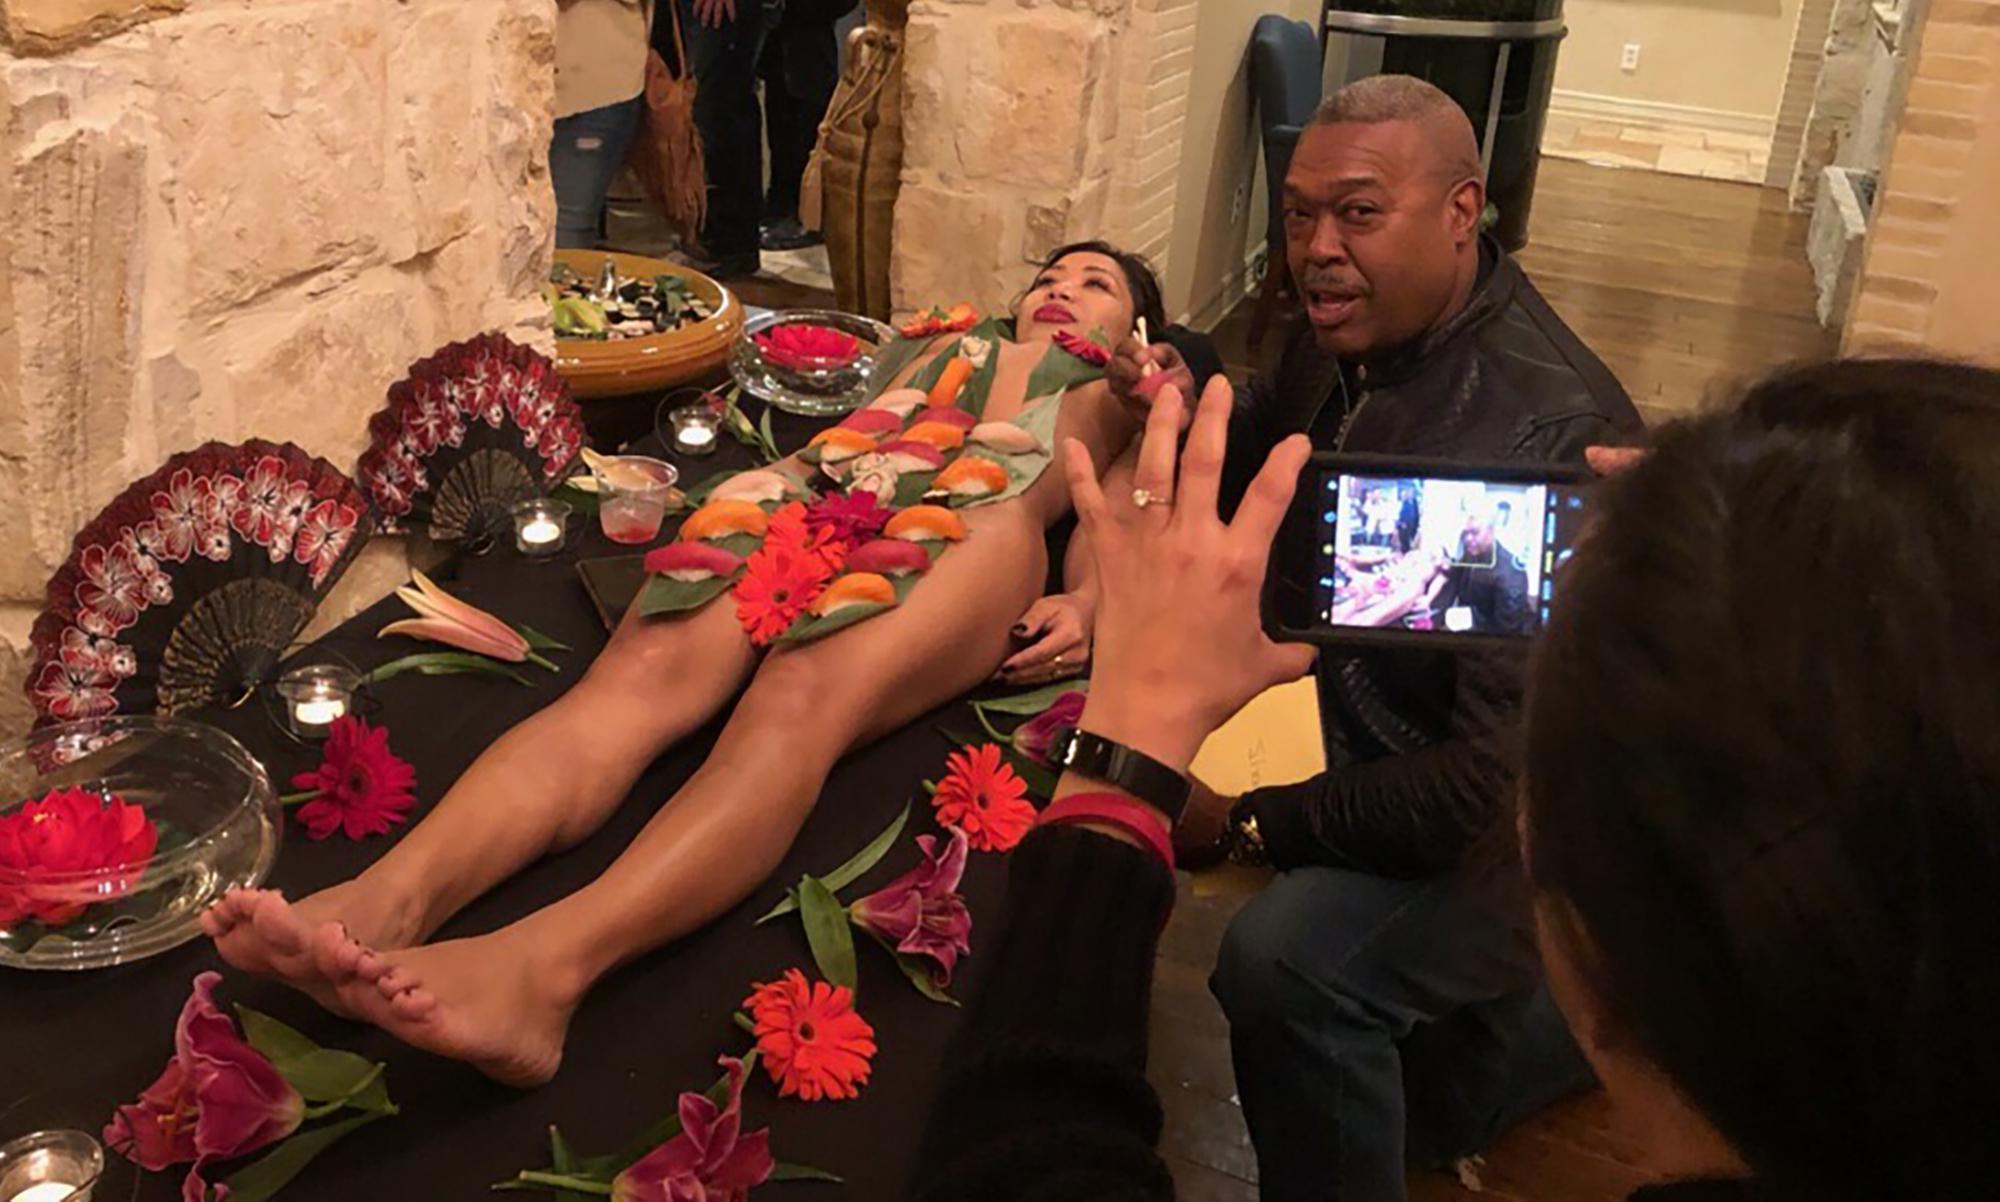 UPDATE: San Antonio Fire Chief Charles Hood defends posing for photo eating  sushi displayed on nude woman